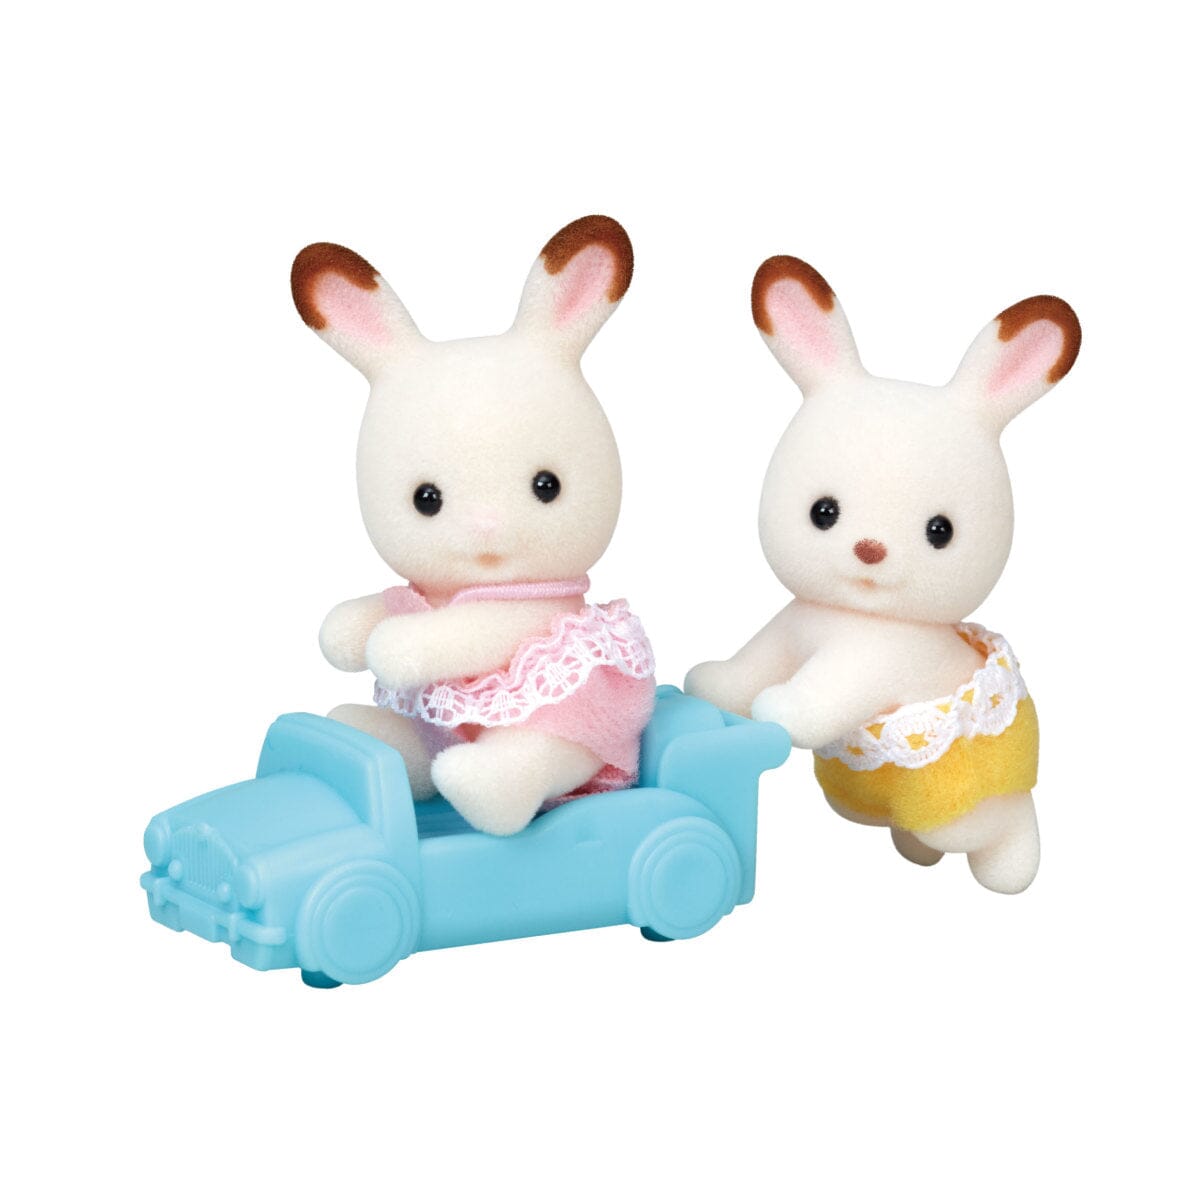 Chocolate Rabbit Twins by Calico Critters